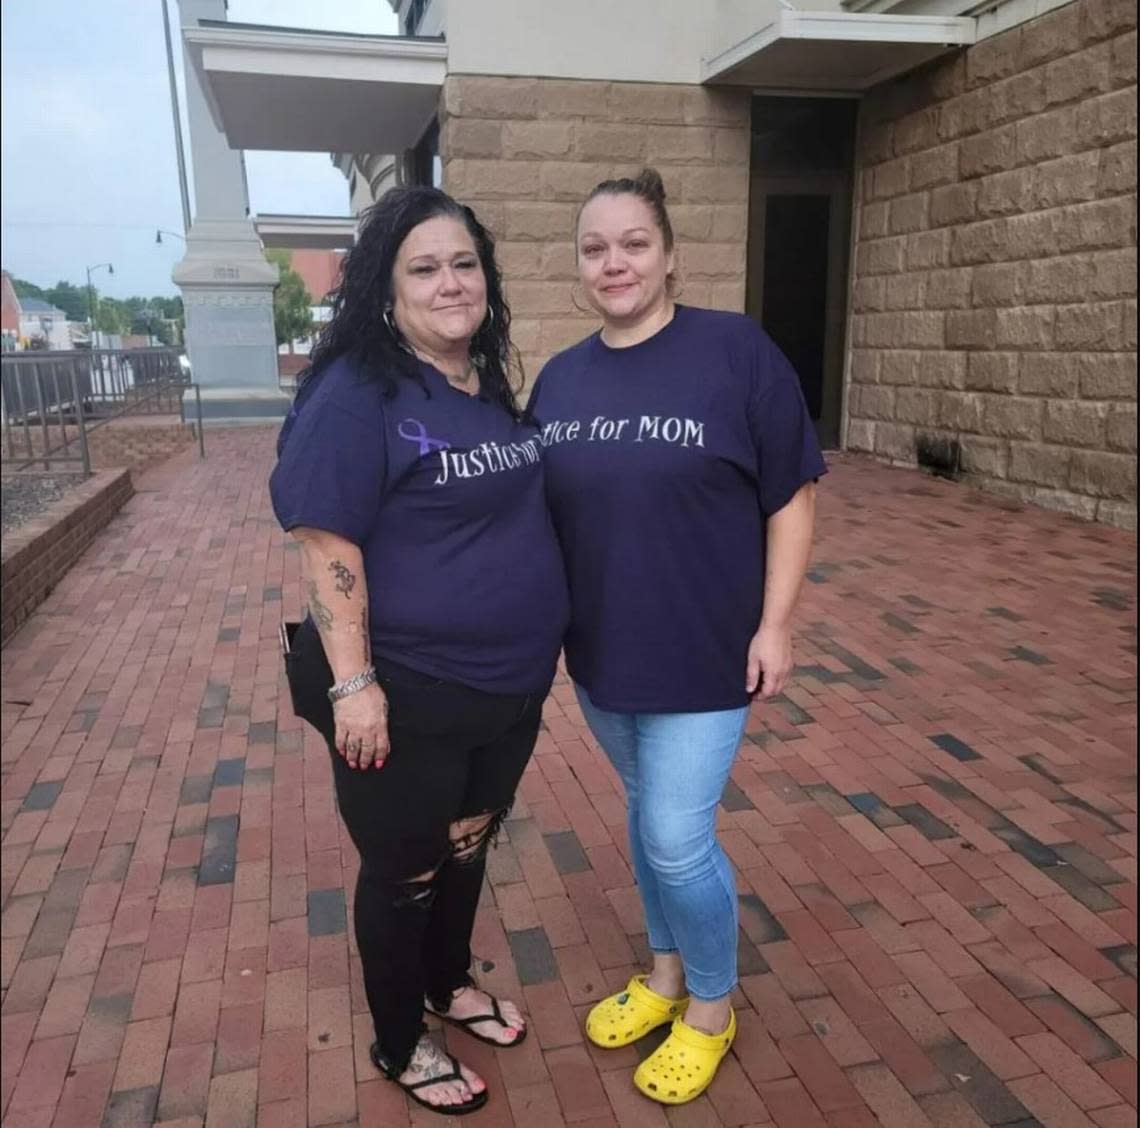 Angie Little and Mandy Chardoudi wear matching shirts outside the Robeson County Courthouse.